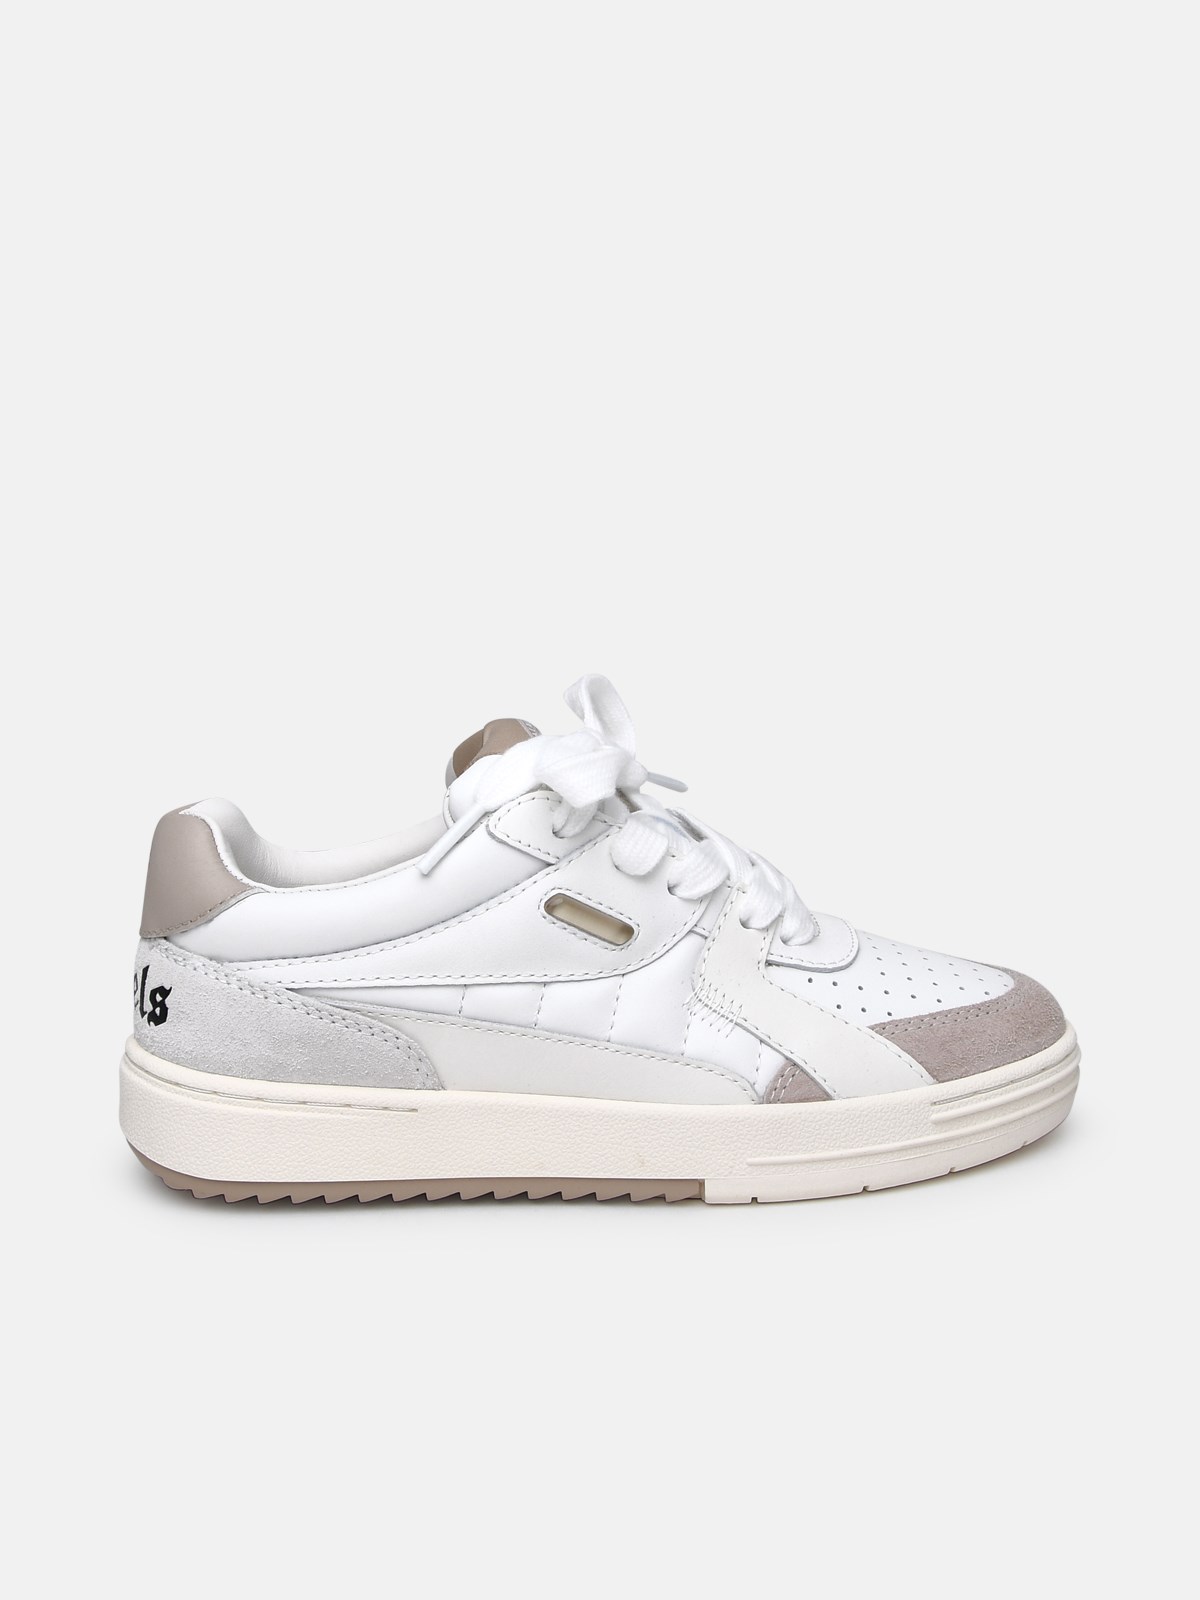 Palm Angels University White Leather Sneakers